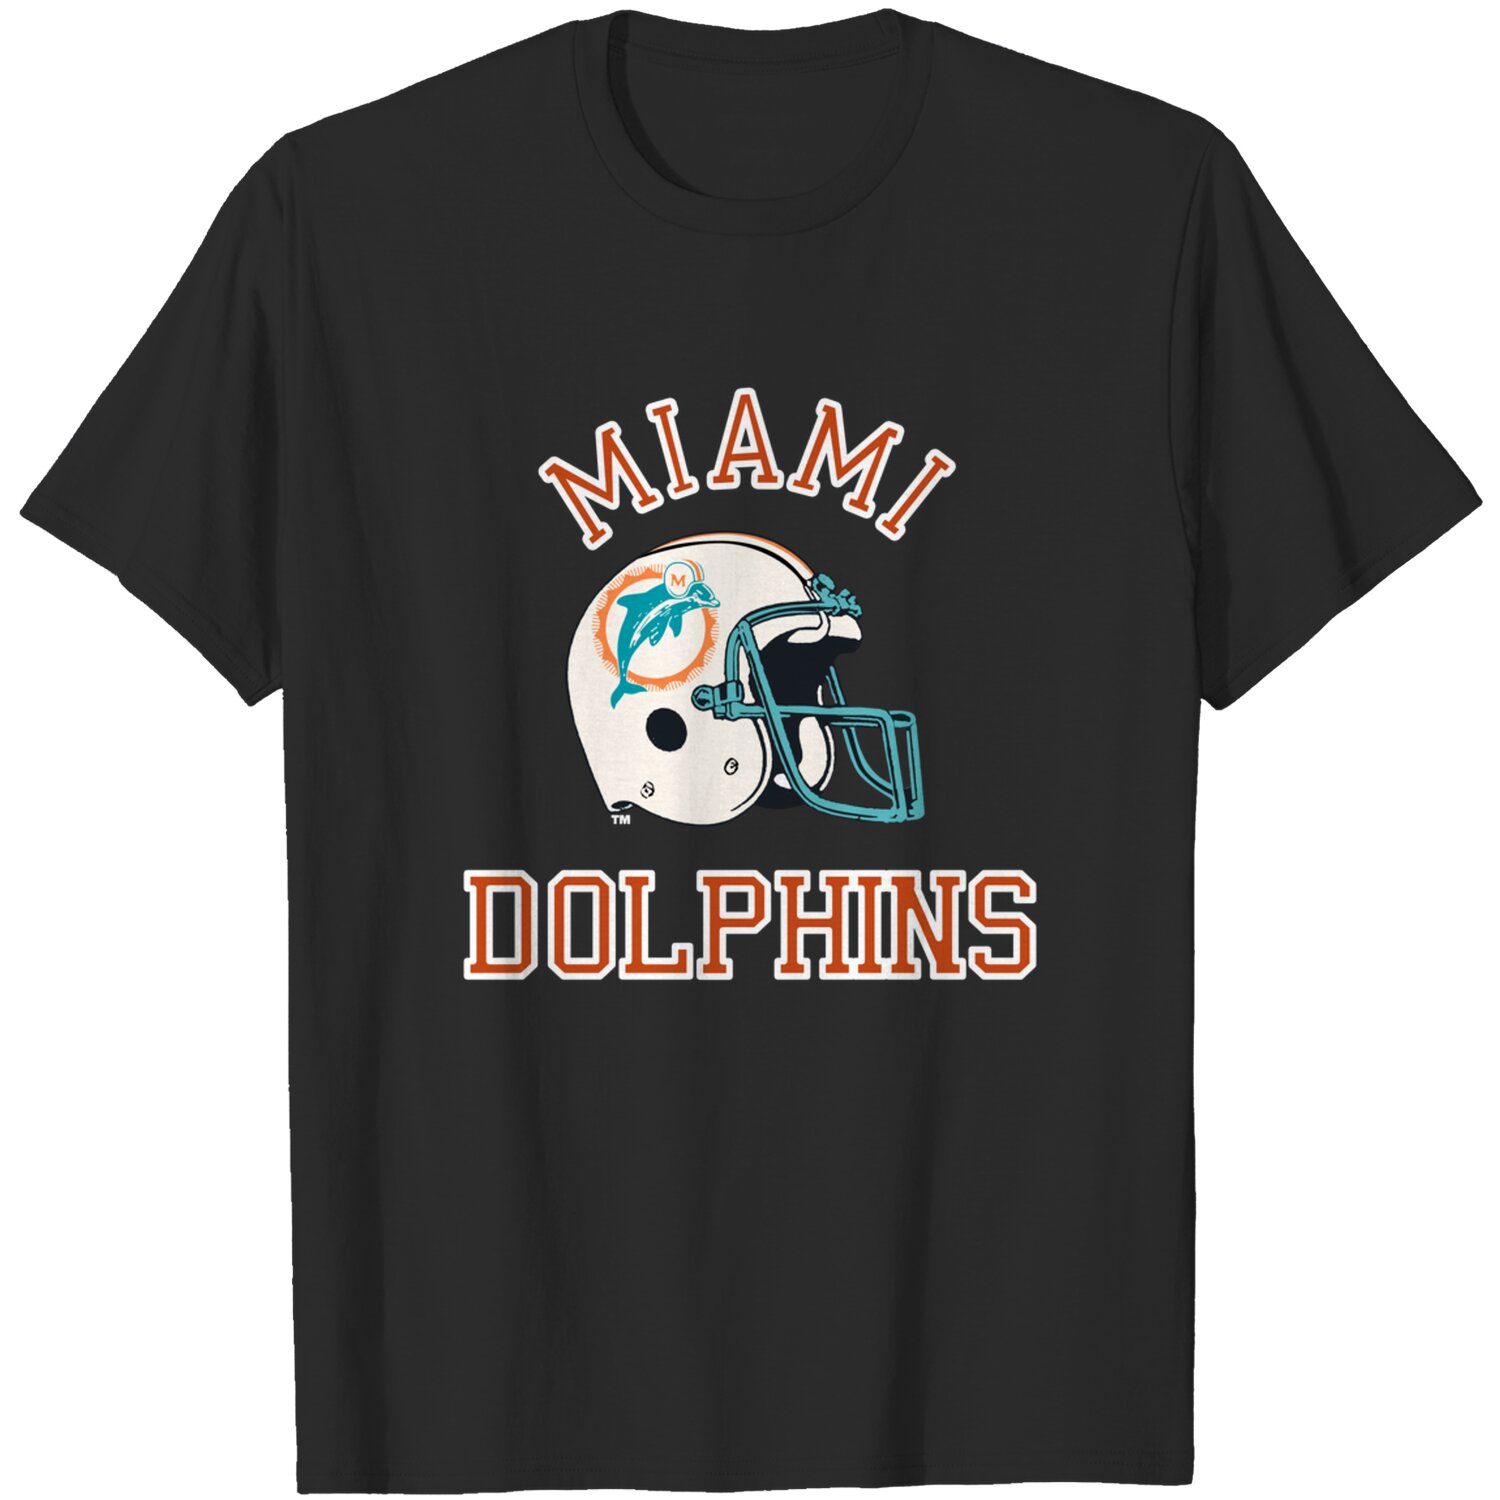 Miami dolphins 1980s T-shirt